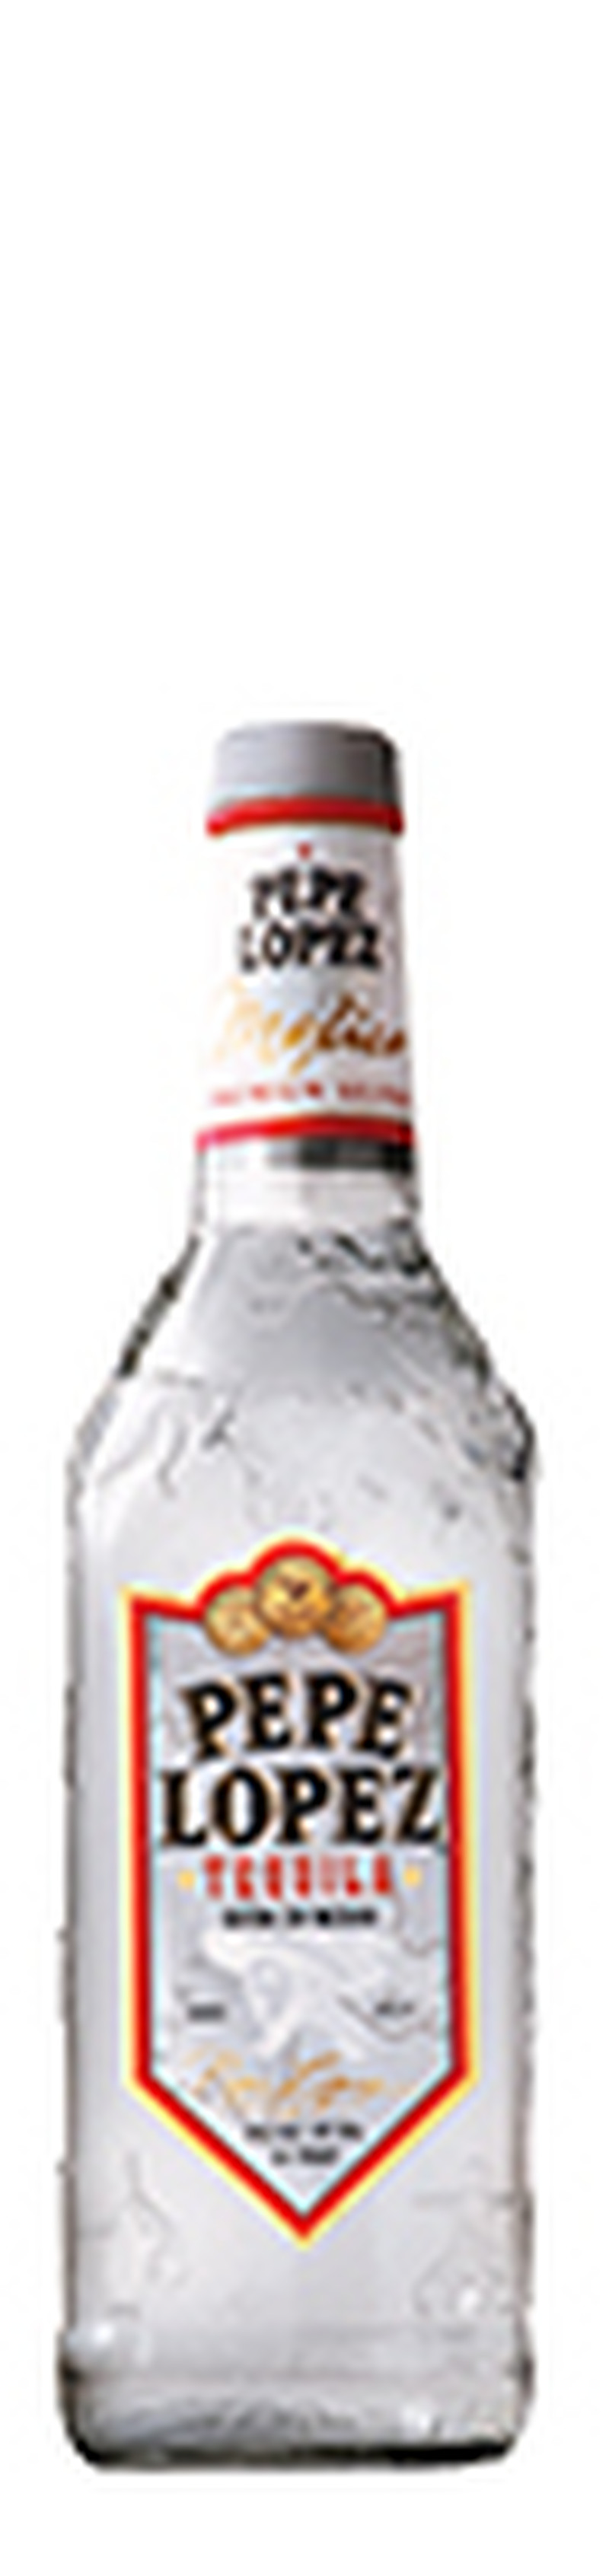 PEPE LOPEZ SILVER  TEQUILA 750ml